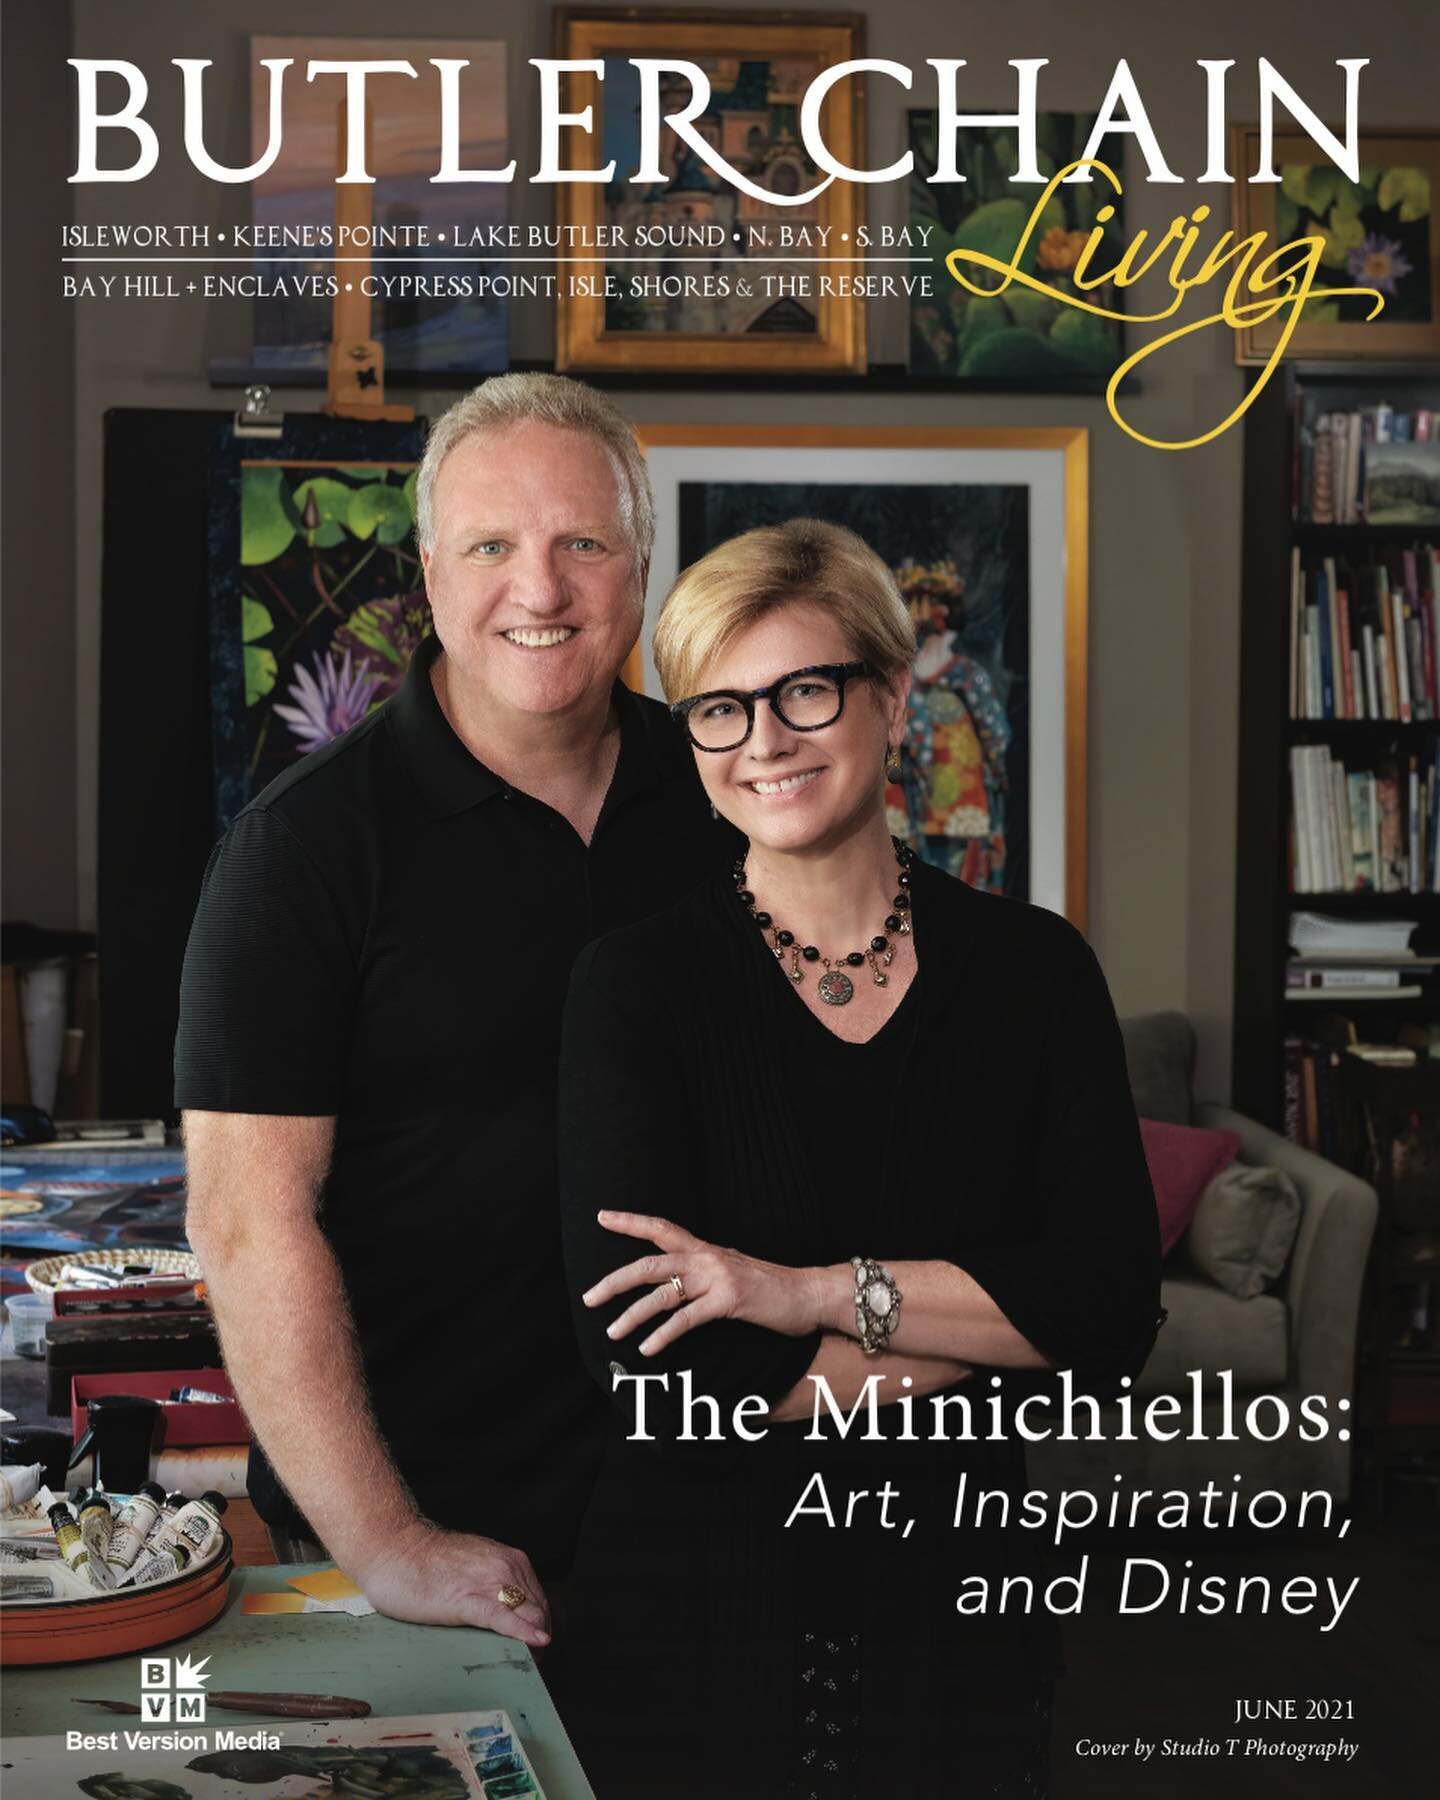 It was so much fun for my husband and I  to be featured in a local community magazine!  Susan Torregrosa, @studiotphoto came to my studio to shoot the cover.  She did an amazing job.  We were so happy to have a photo of us that we both actually like!